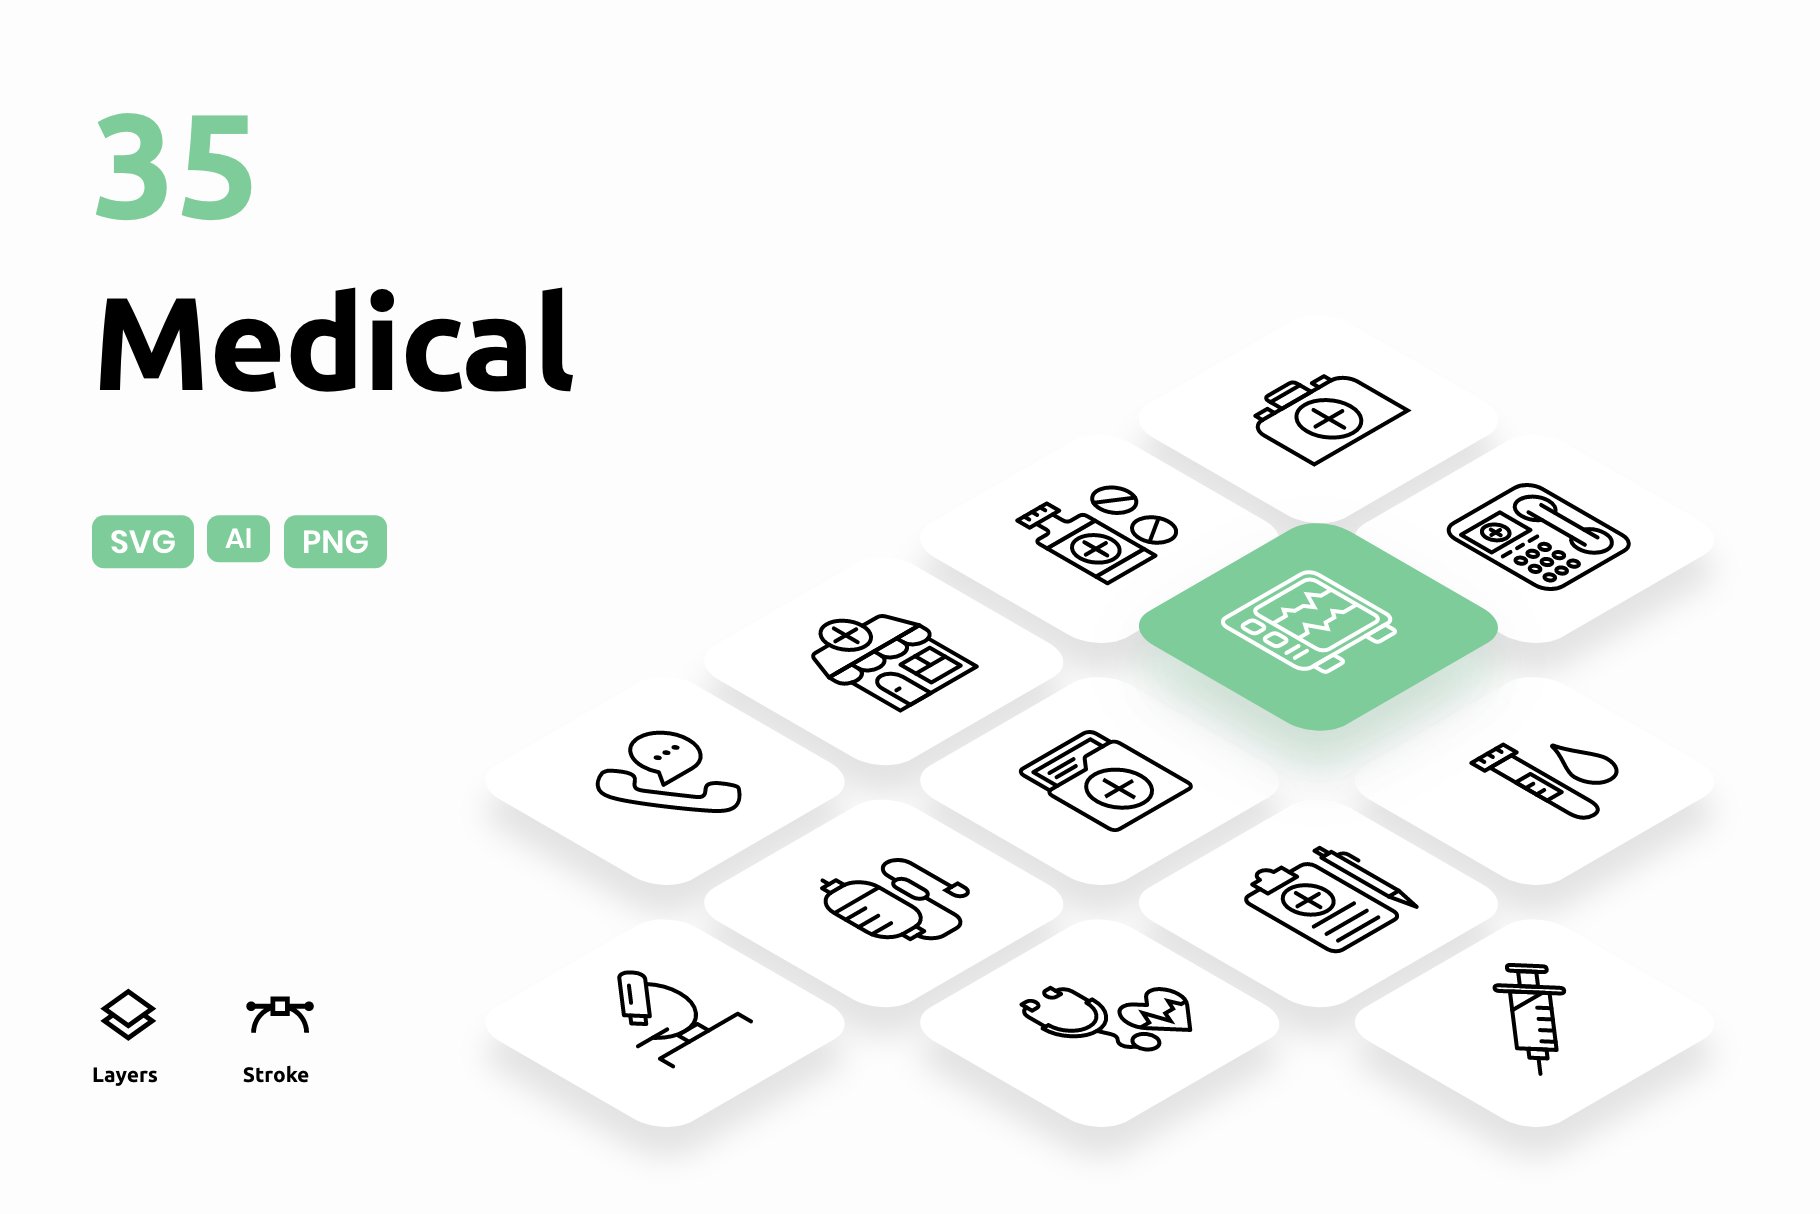 Medical - Icons Pack (Outline) cover image.